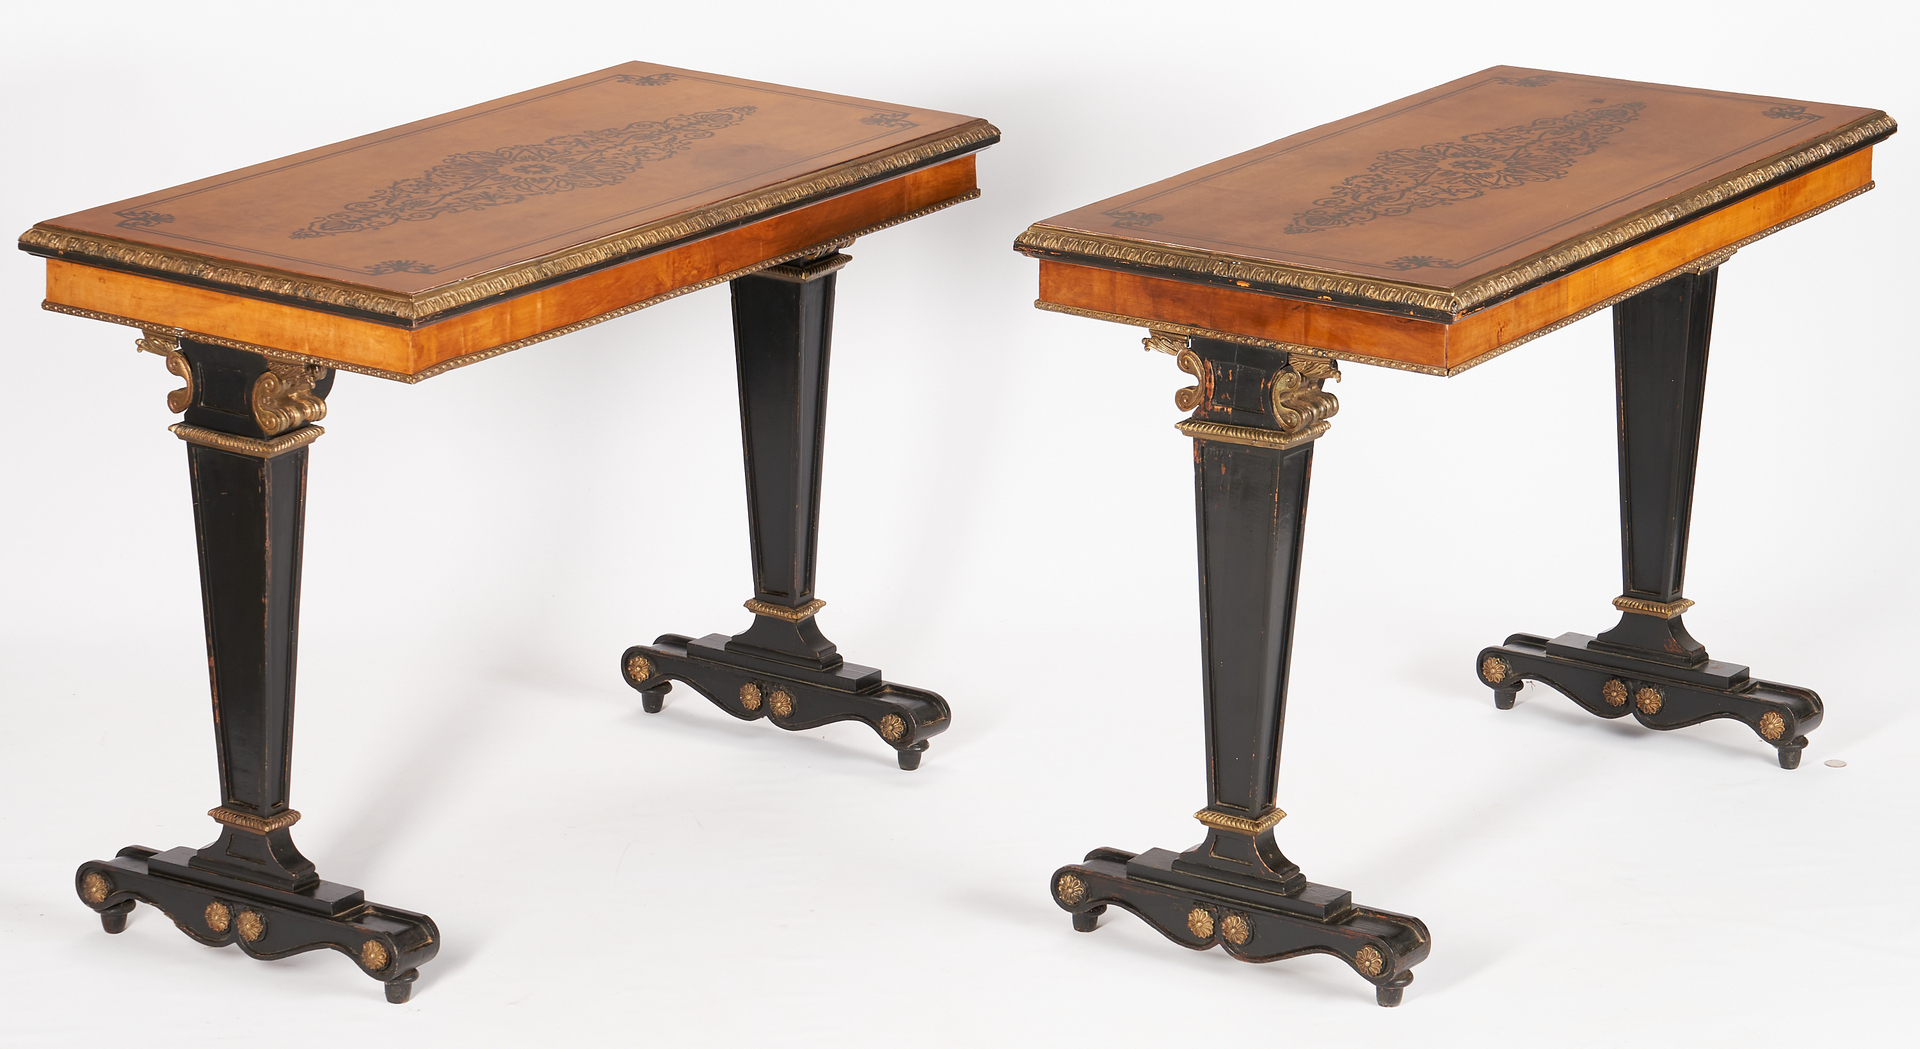 Lot 234: Pair Continental Neo-Grec or Regency Style Pier Tables